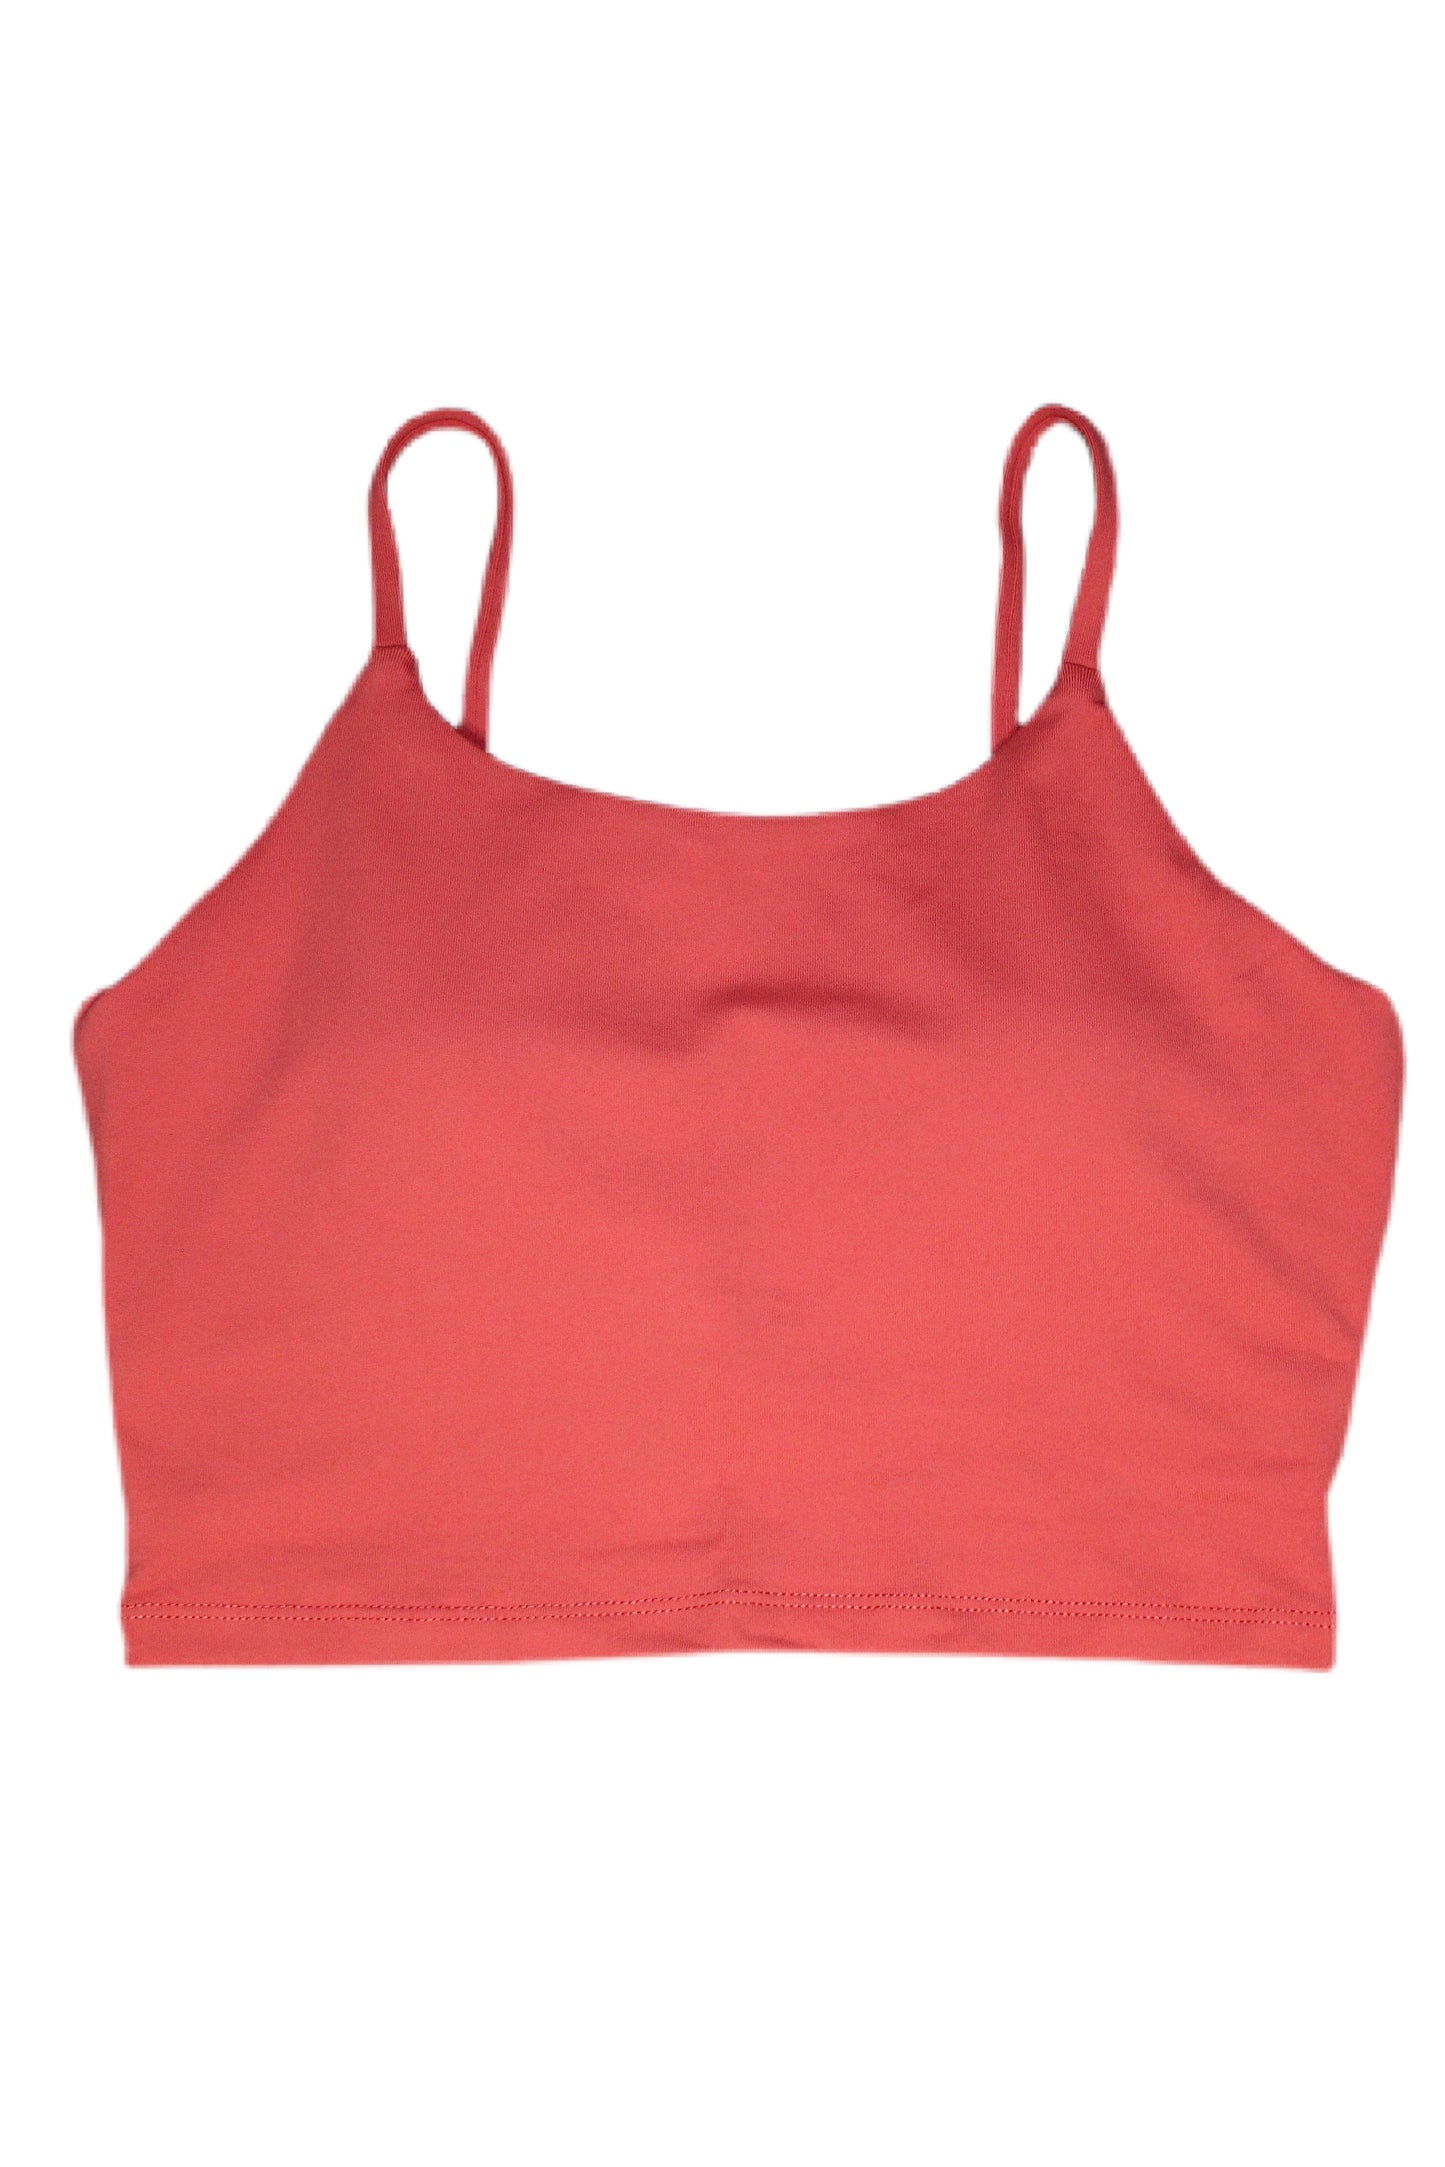 Women's Tropical Punch Coral Cami Crop Tank Top